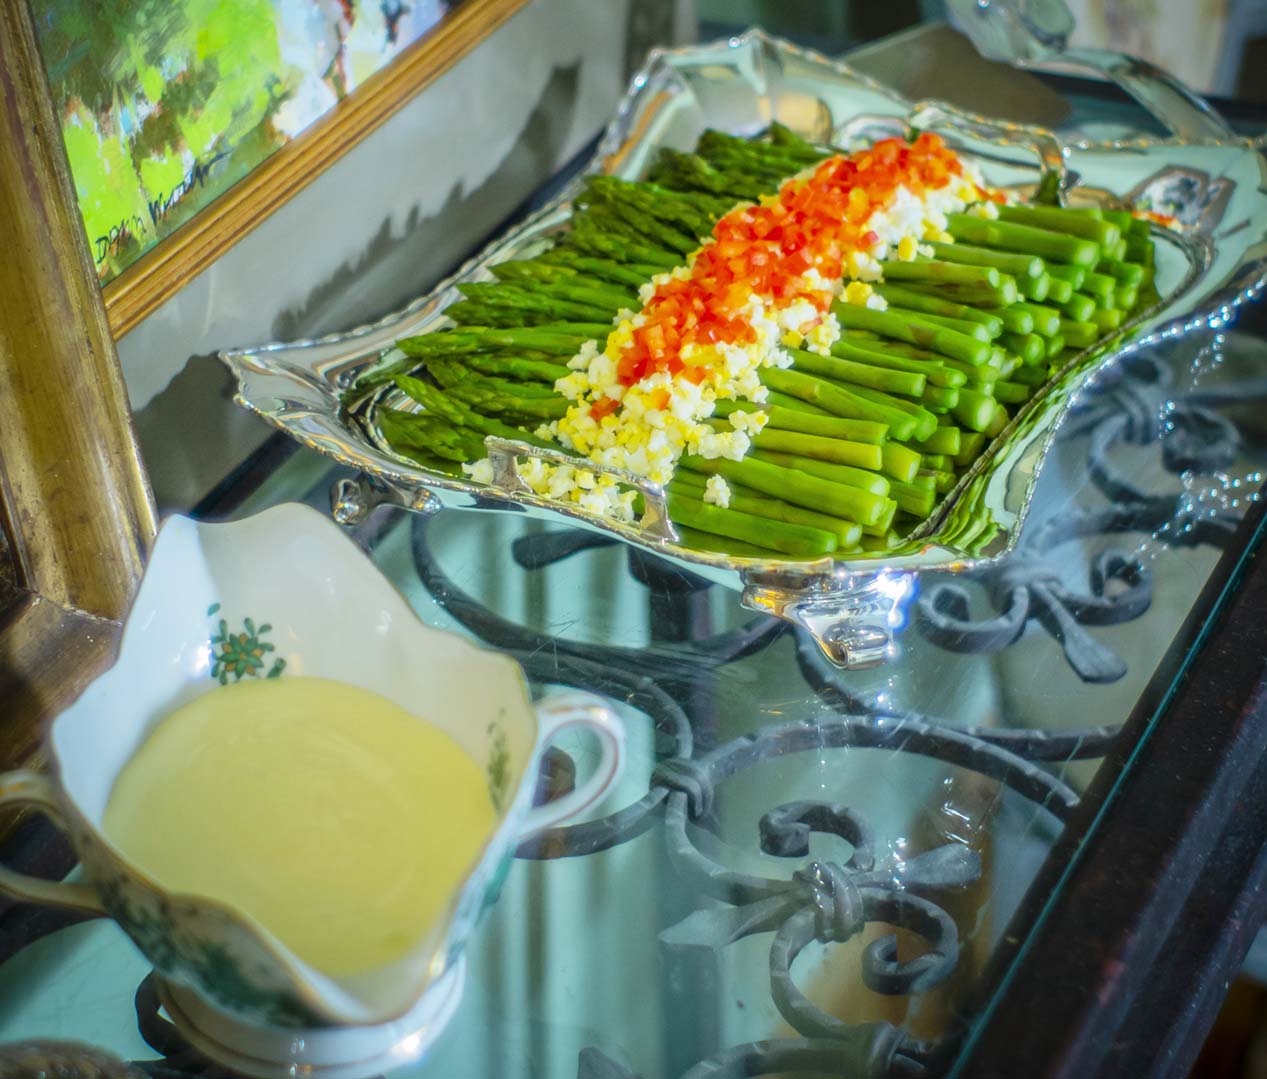 Steamed asparagus in a Sterling Asparagus Tray by Tiffany & Co, with a side of hollandaise sauce in a Herend “Indian Basket” Green gravy boat, both from Replacements Ltd